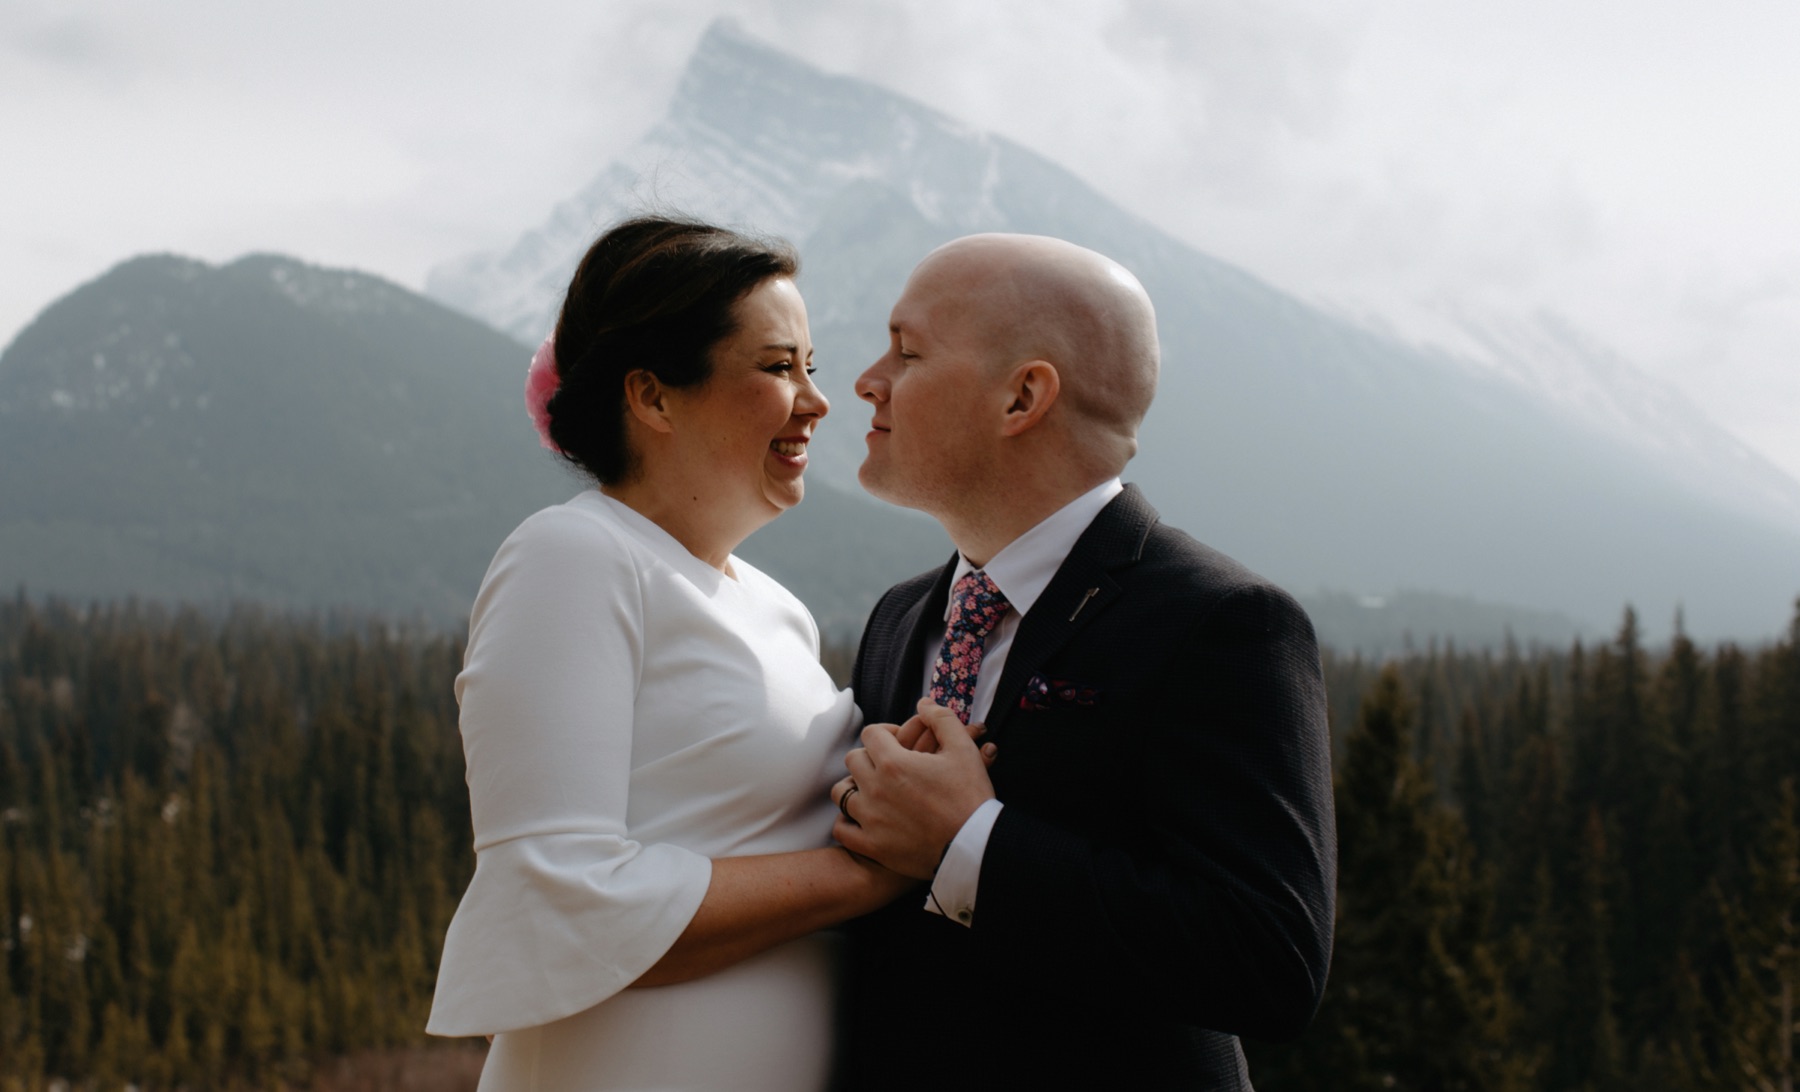 Newly married couple with Mount Rundle backdrop in Banff